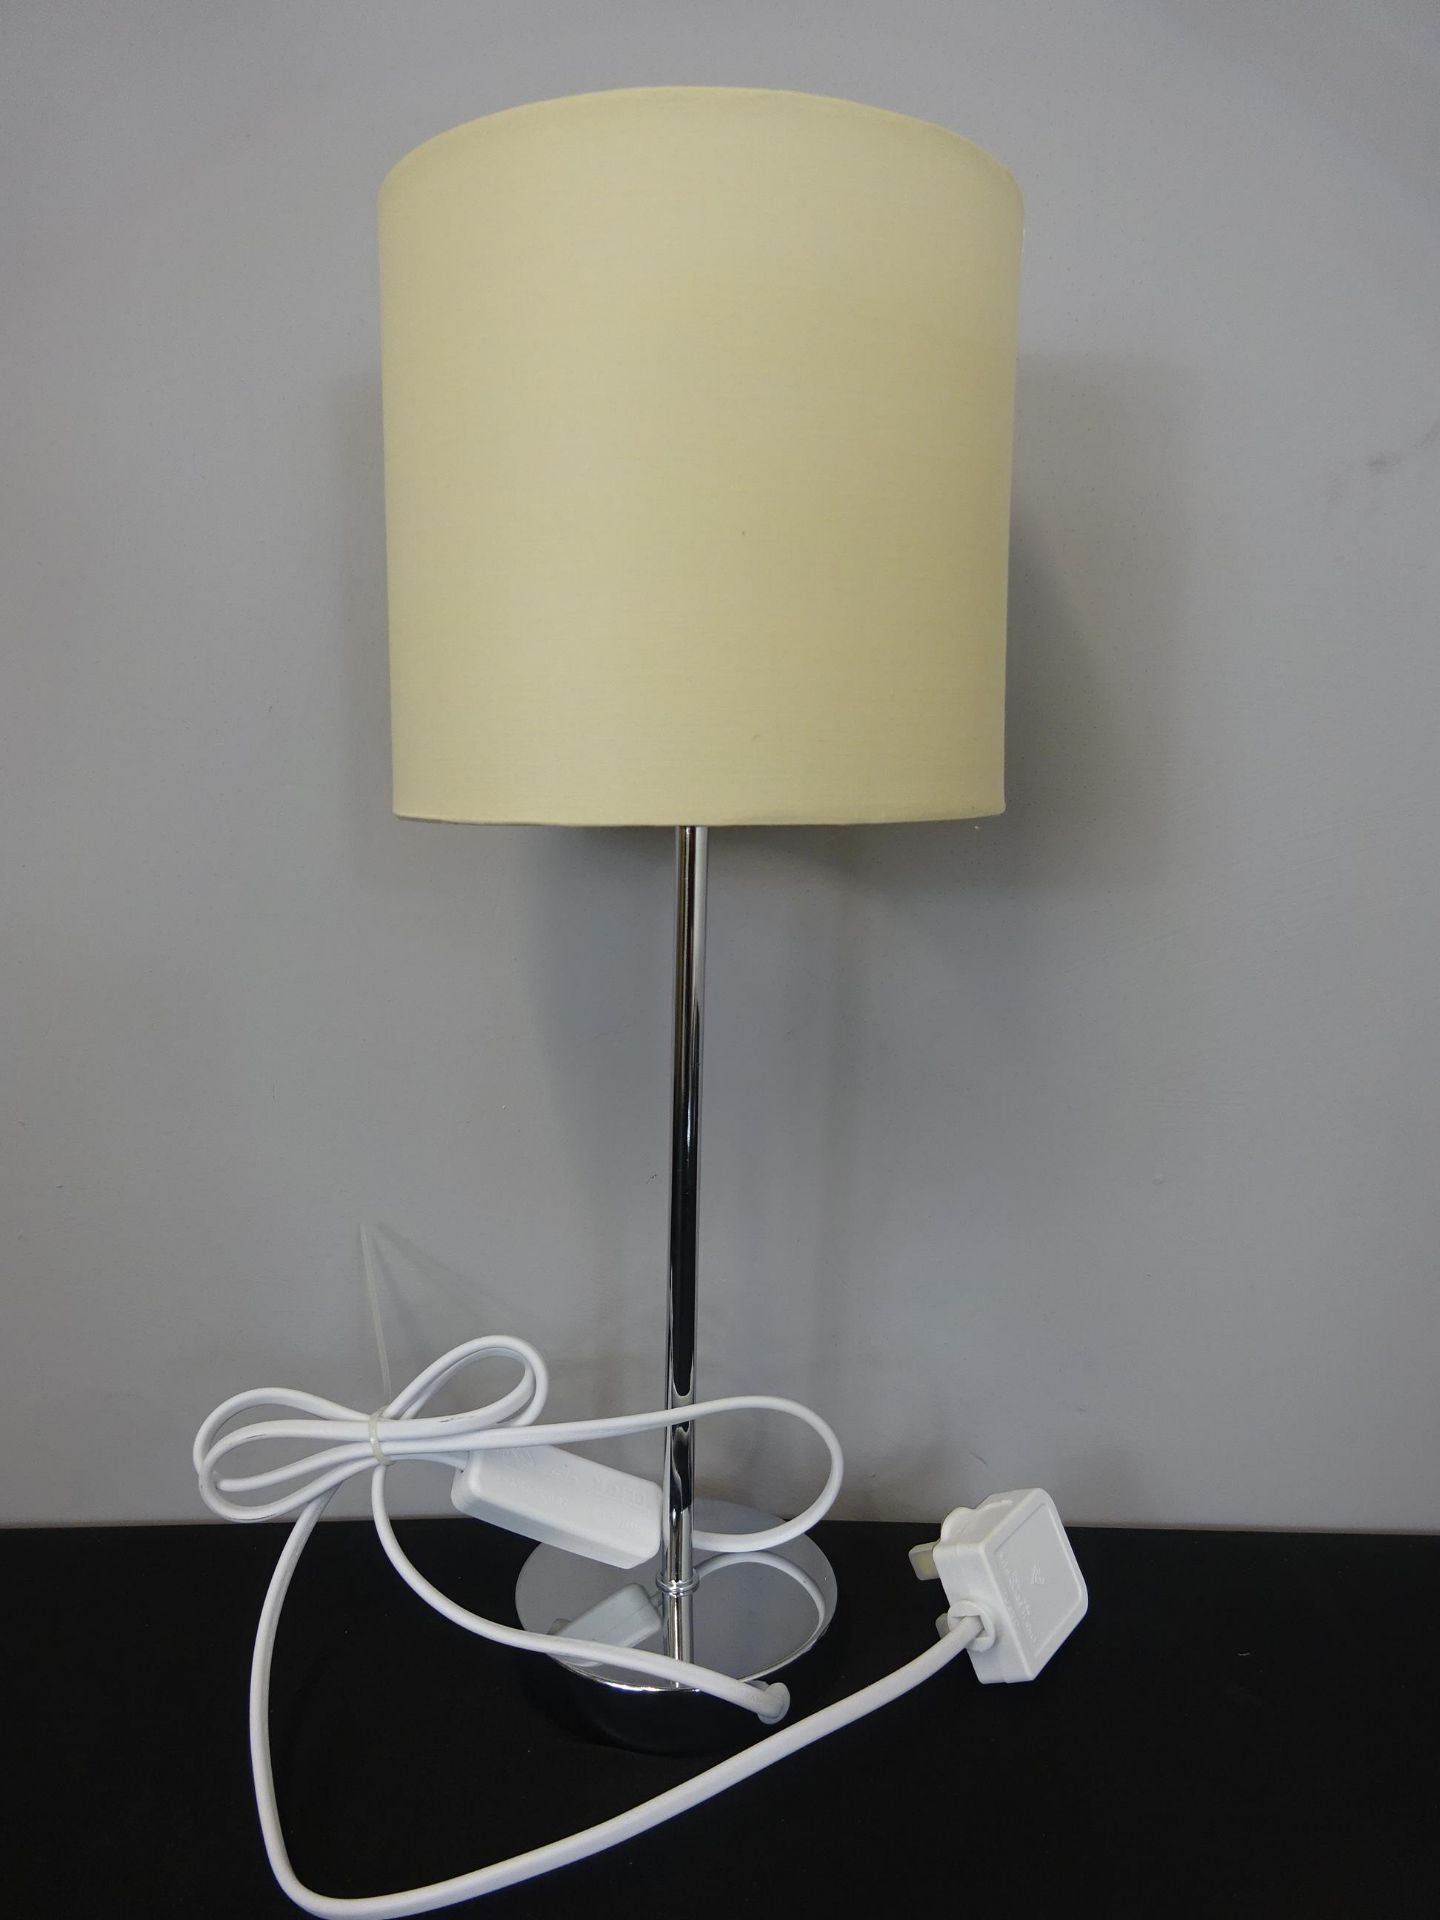 BOX OF 12 BRAND NEW METAL LAMPS AND SHADES, 40CM HEIGHT. RRP £19.99 EACH